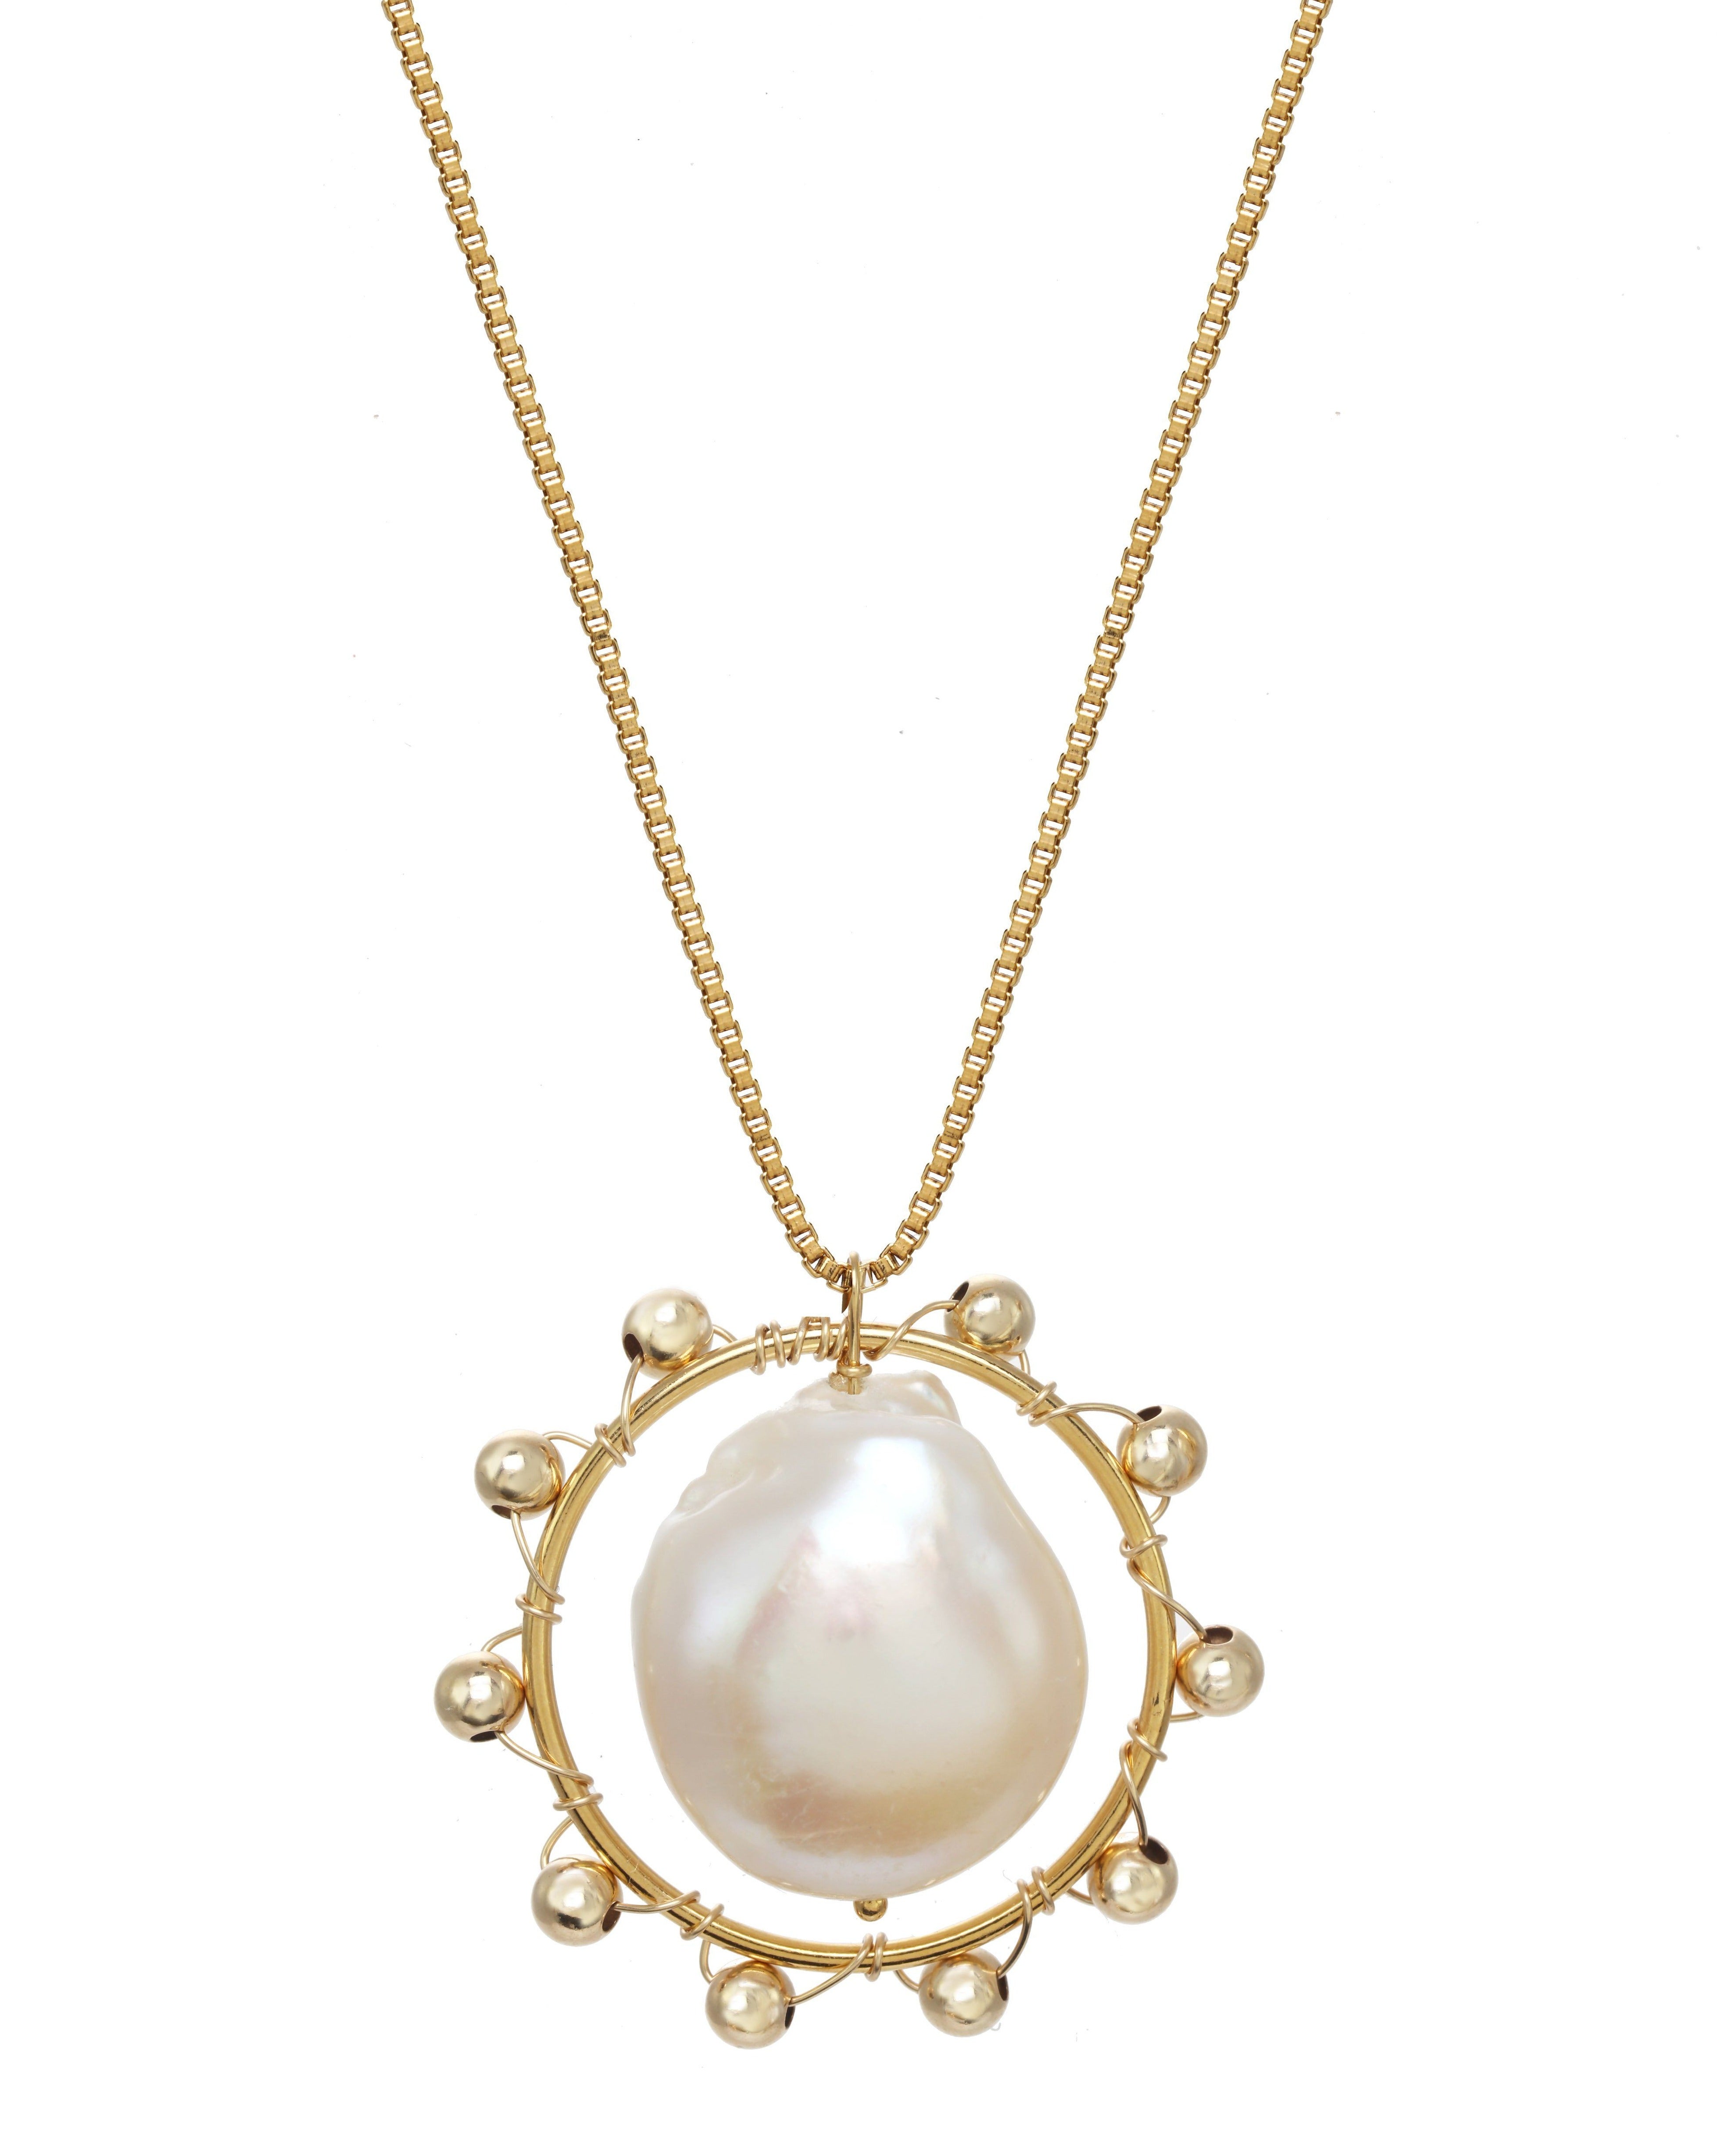 Kuru Necklace by KOZAKH. A 16 to 18 inch adjustable length, 1mm box chain necklace, crafted in 14K Gold Filled, featuring a 20mm x 15mm Baroque Pearl inside a ring embellished with gold beads.